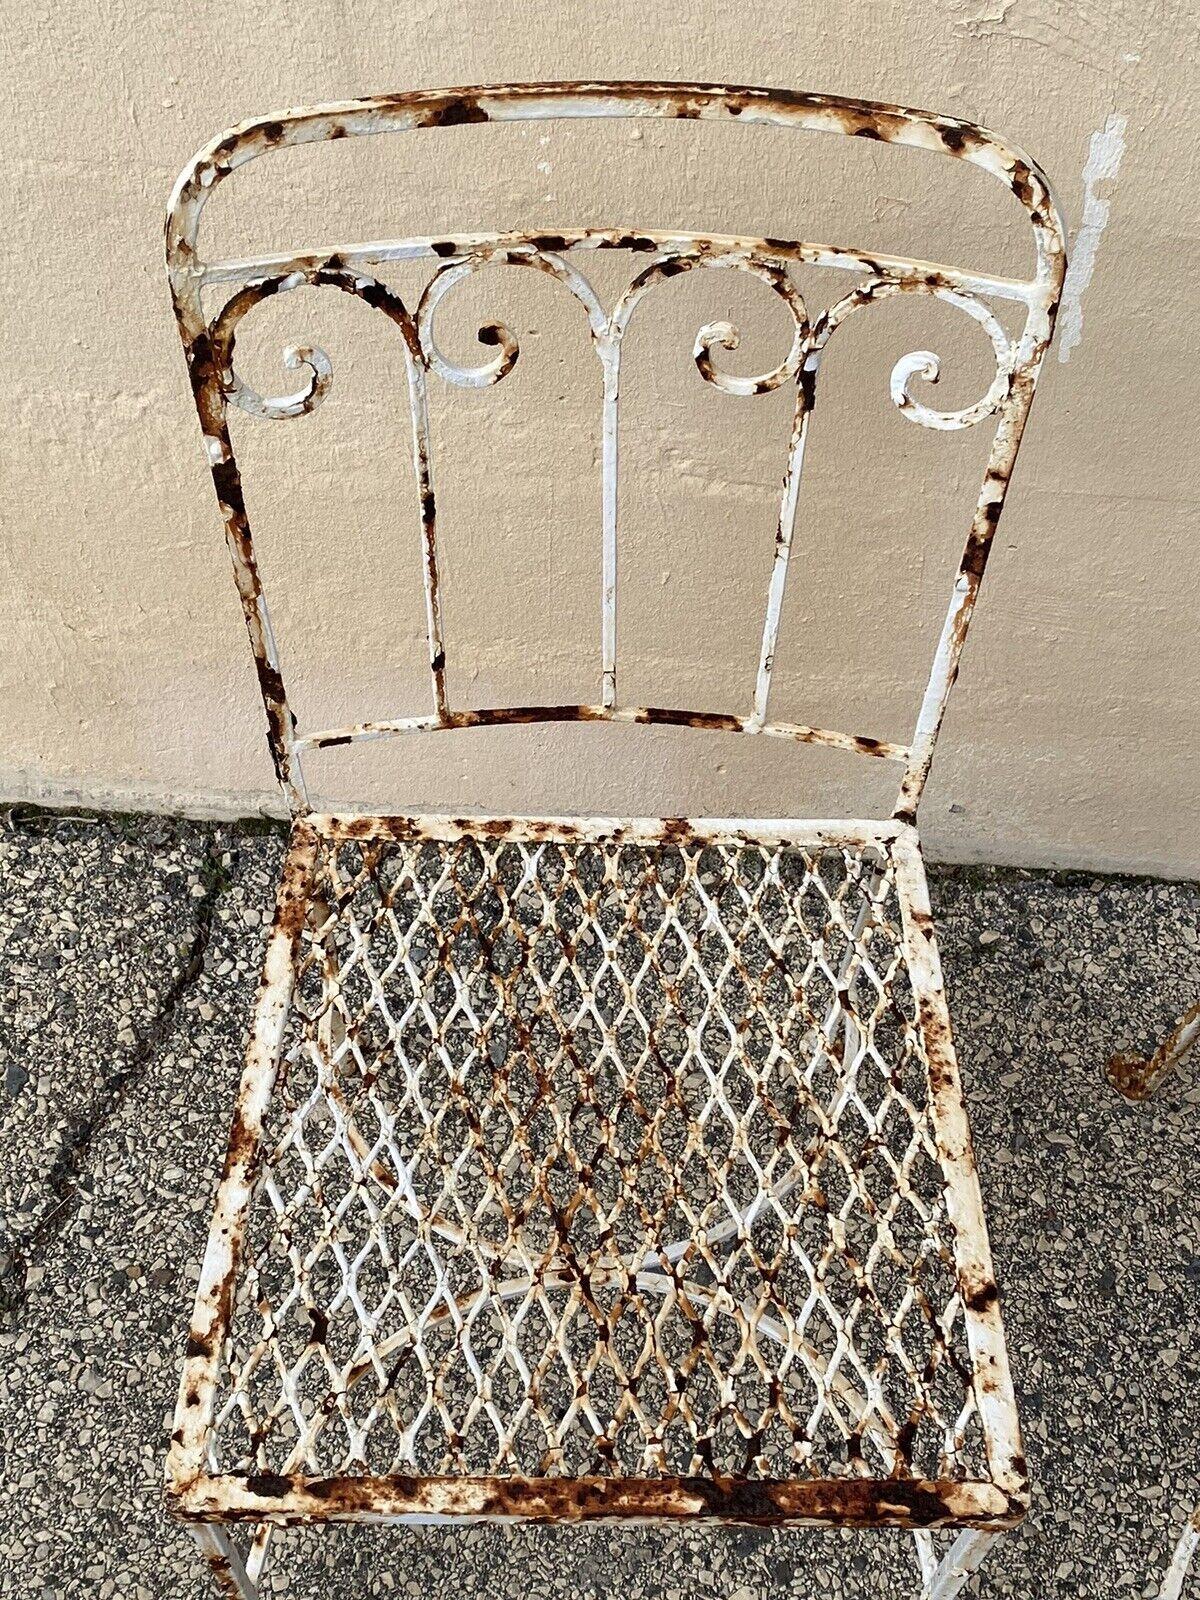 Antique Art Nouveau Scrolling Wrought Iron Garden Patio Dining Chairs - A Pair For Sale 1